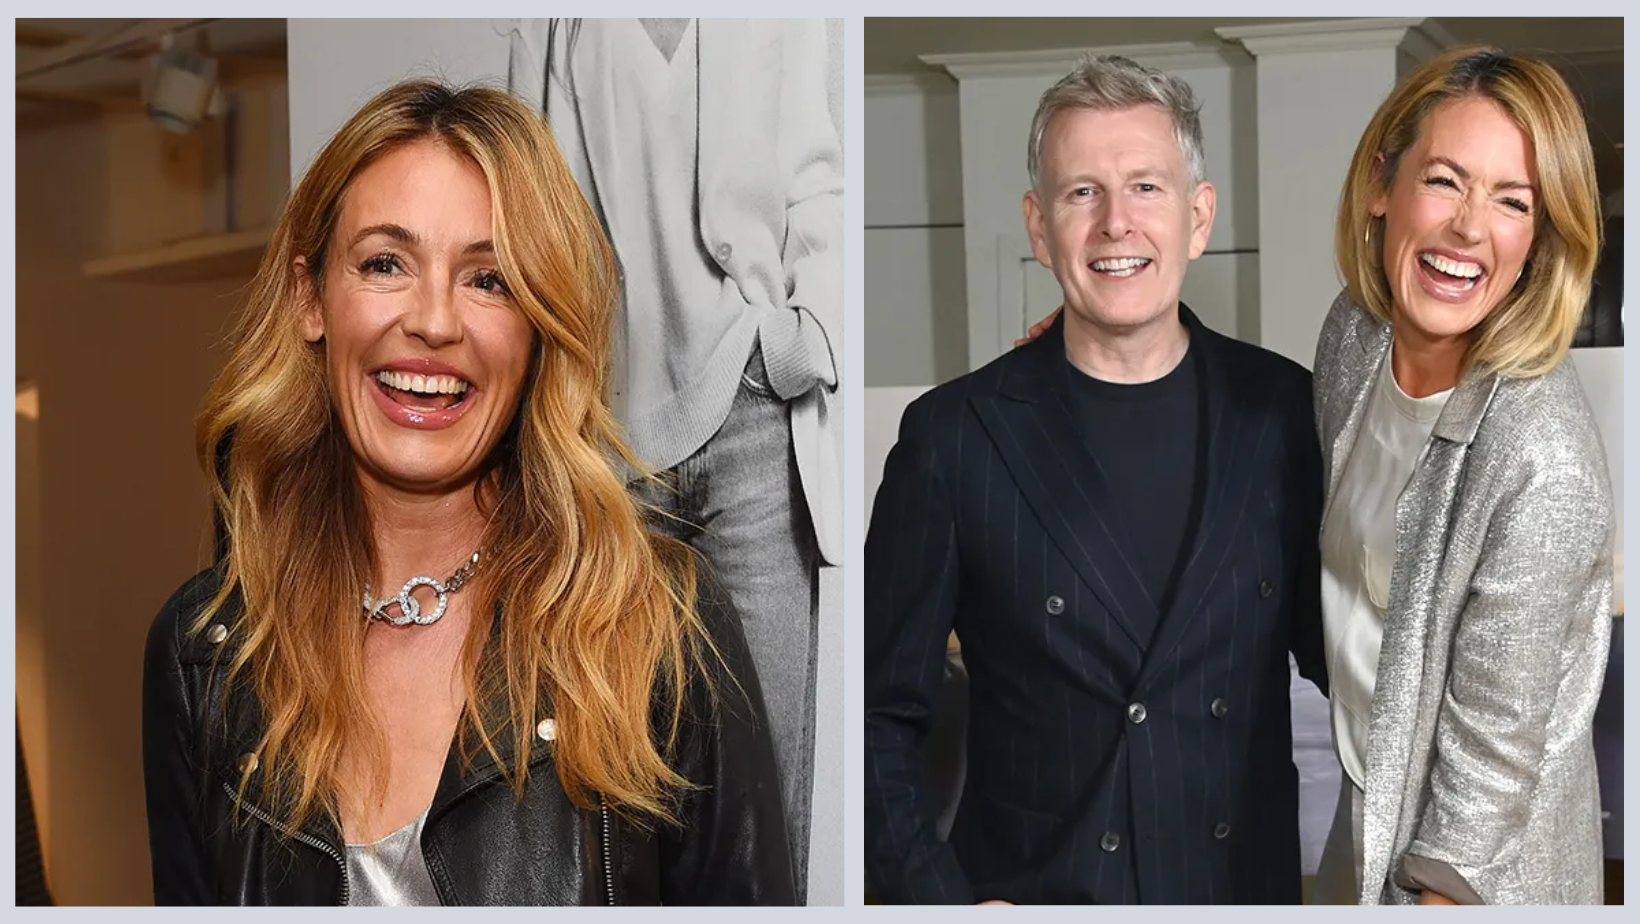 Where Is Cat Deeley Going: Is She Leaving Fox News?